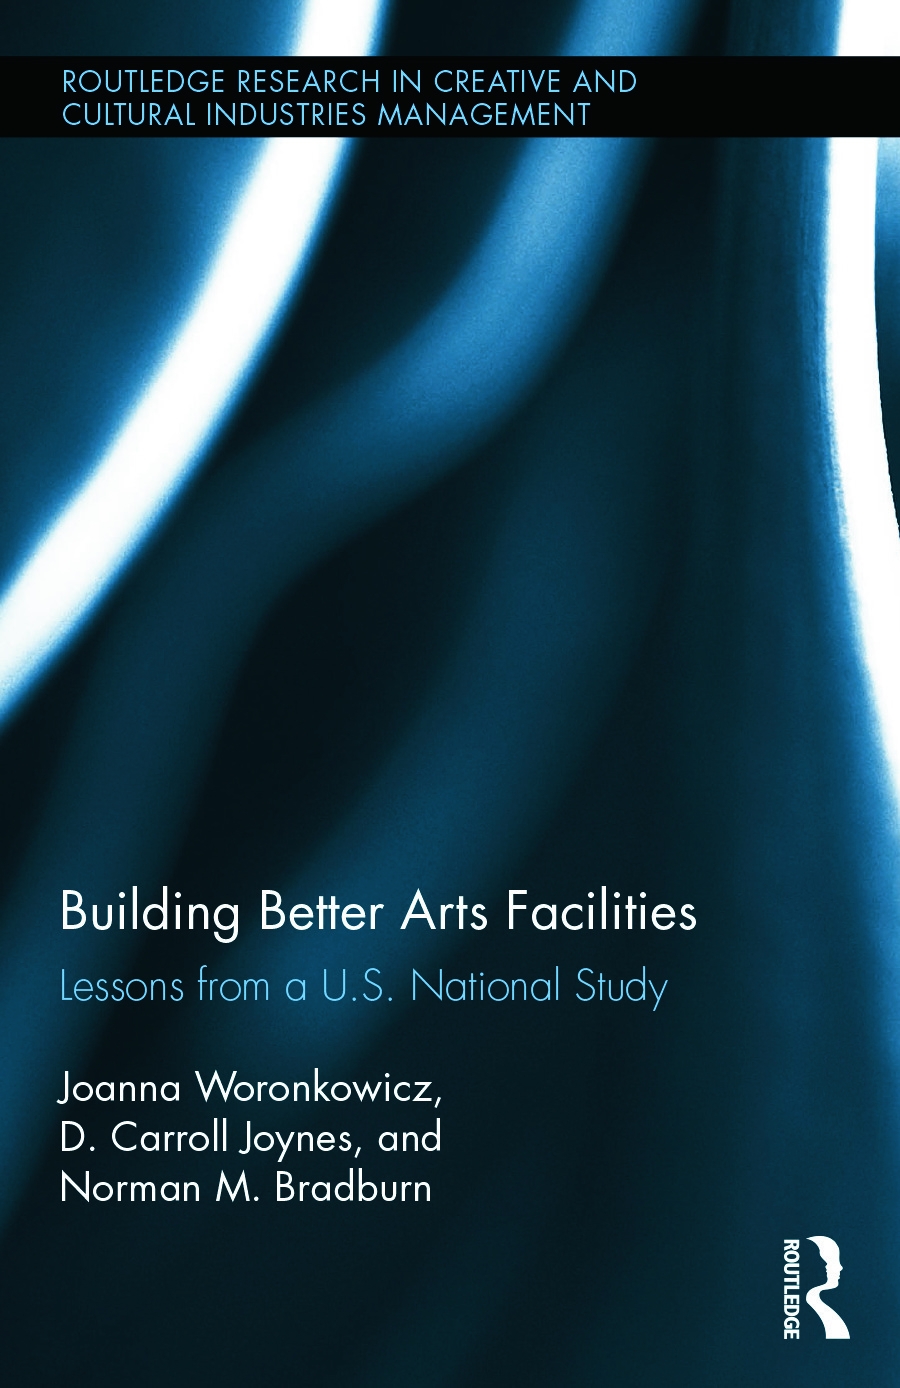 Building Better Arts Facilities: Lessons from a U.S. National Study.